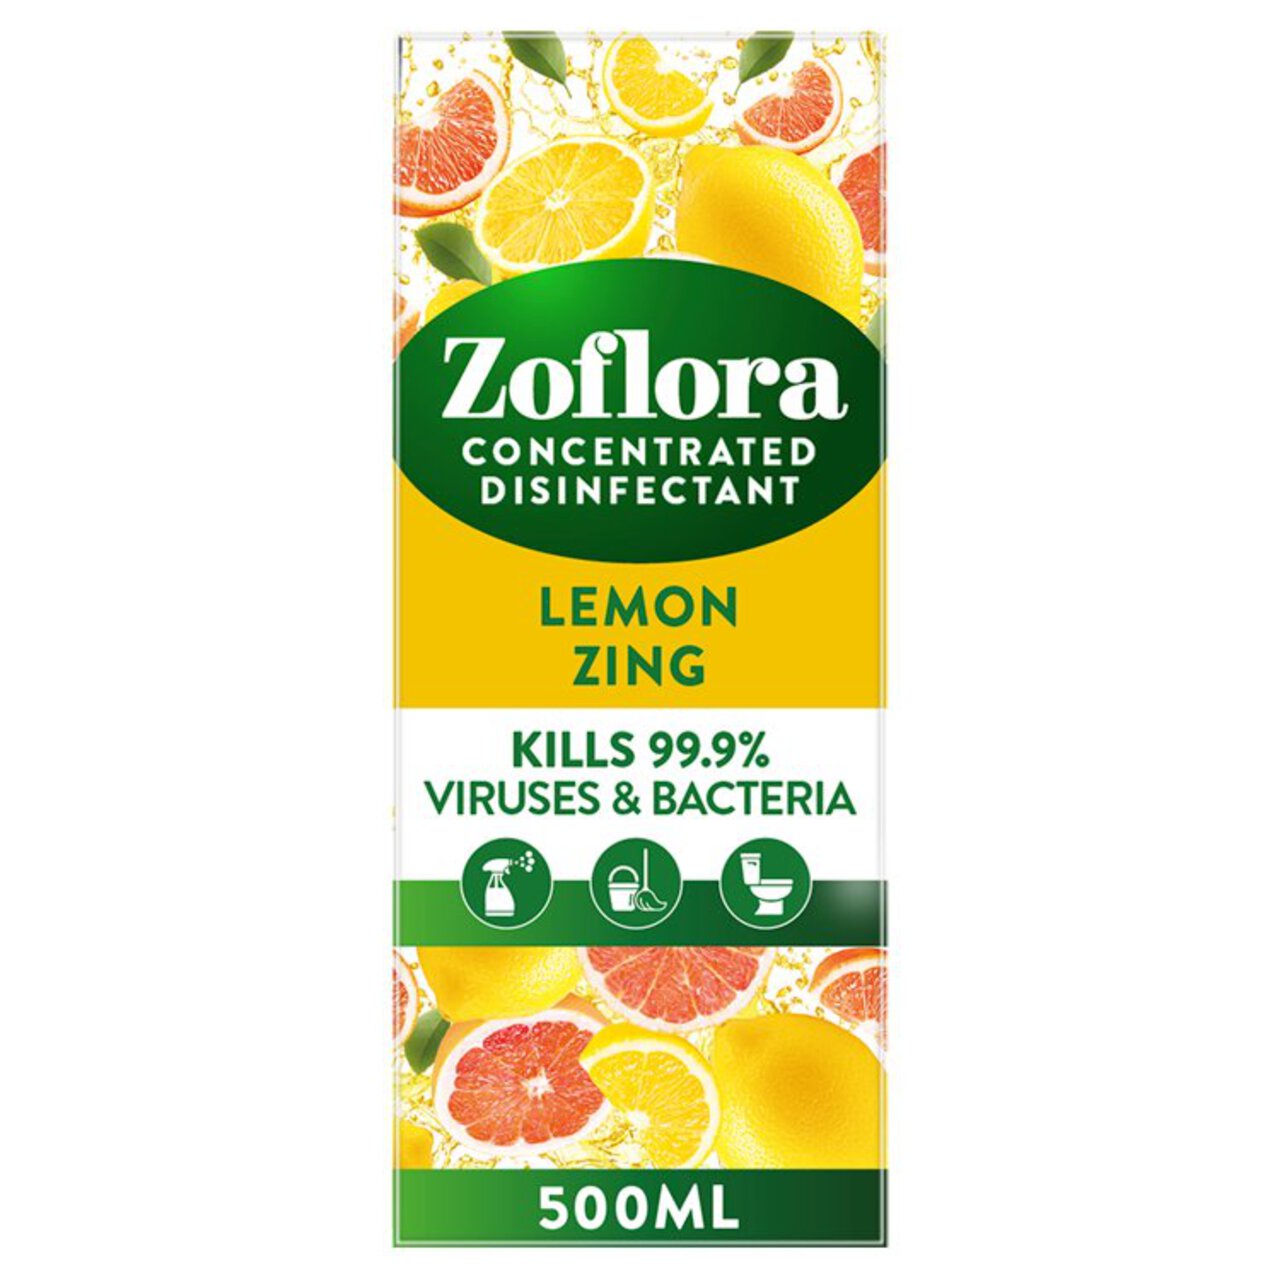 Zoflora Concentrated Disinfectant Lemon Zing 500ml